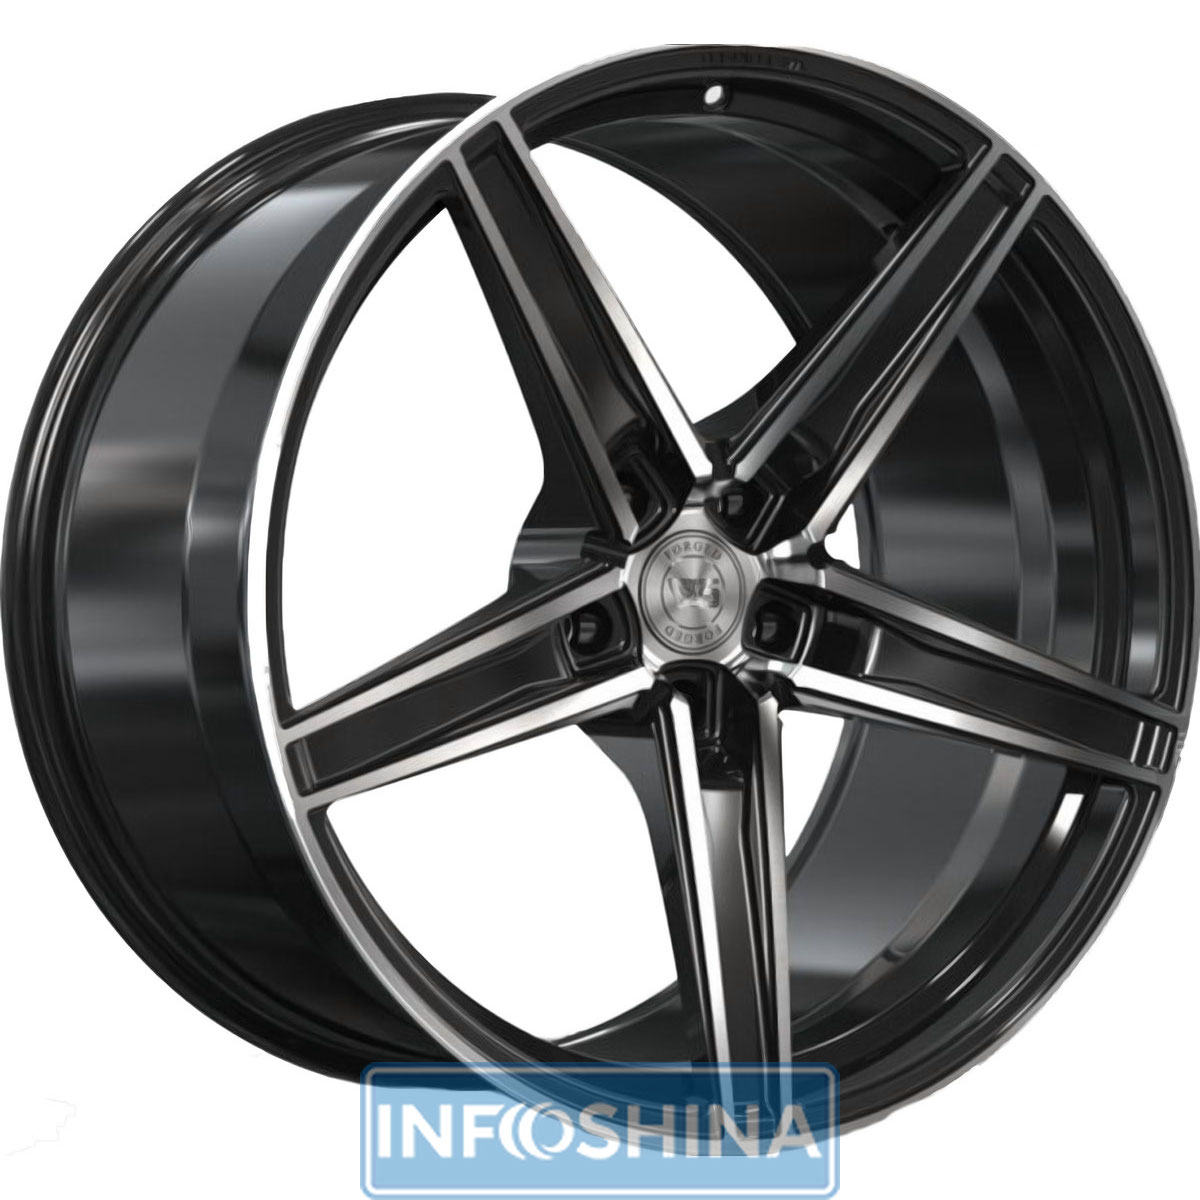 Купить диски WS Forged WS2115 Gloss Black With Machined Face R21 W11.5 PCD5x120 ET26 DIA74.1